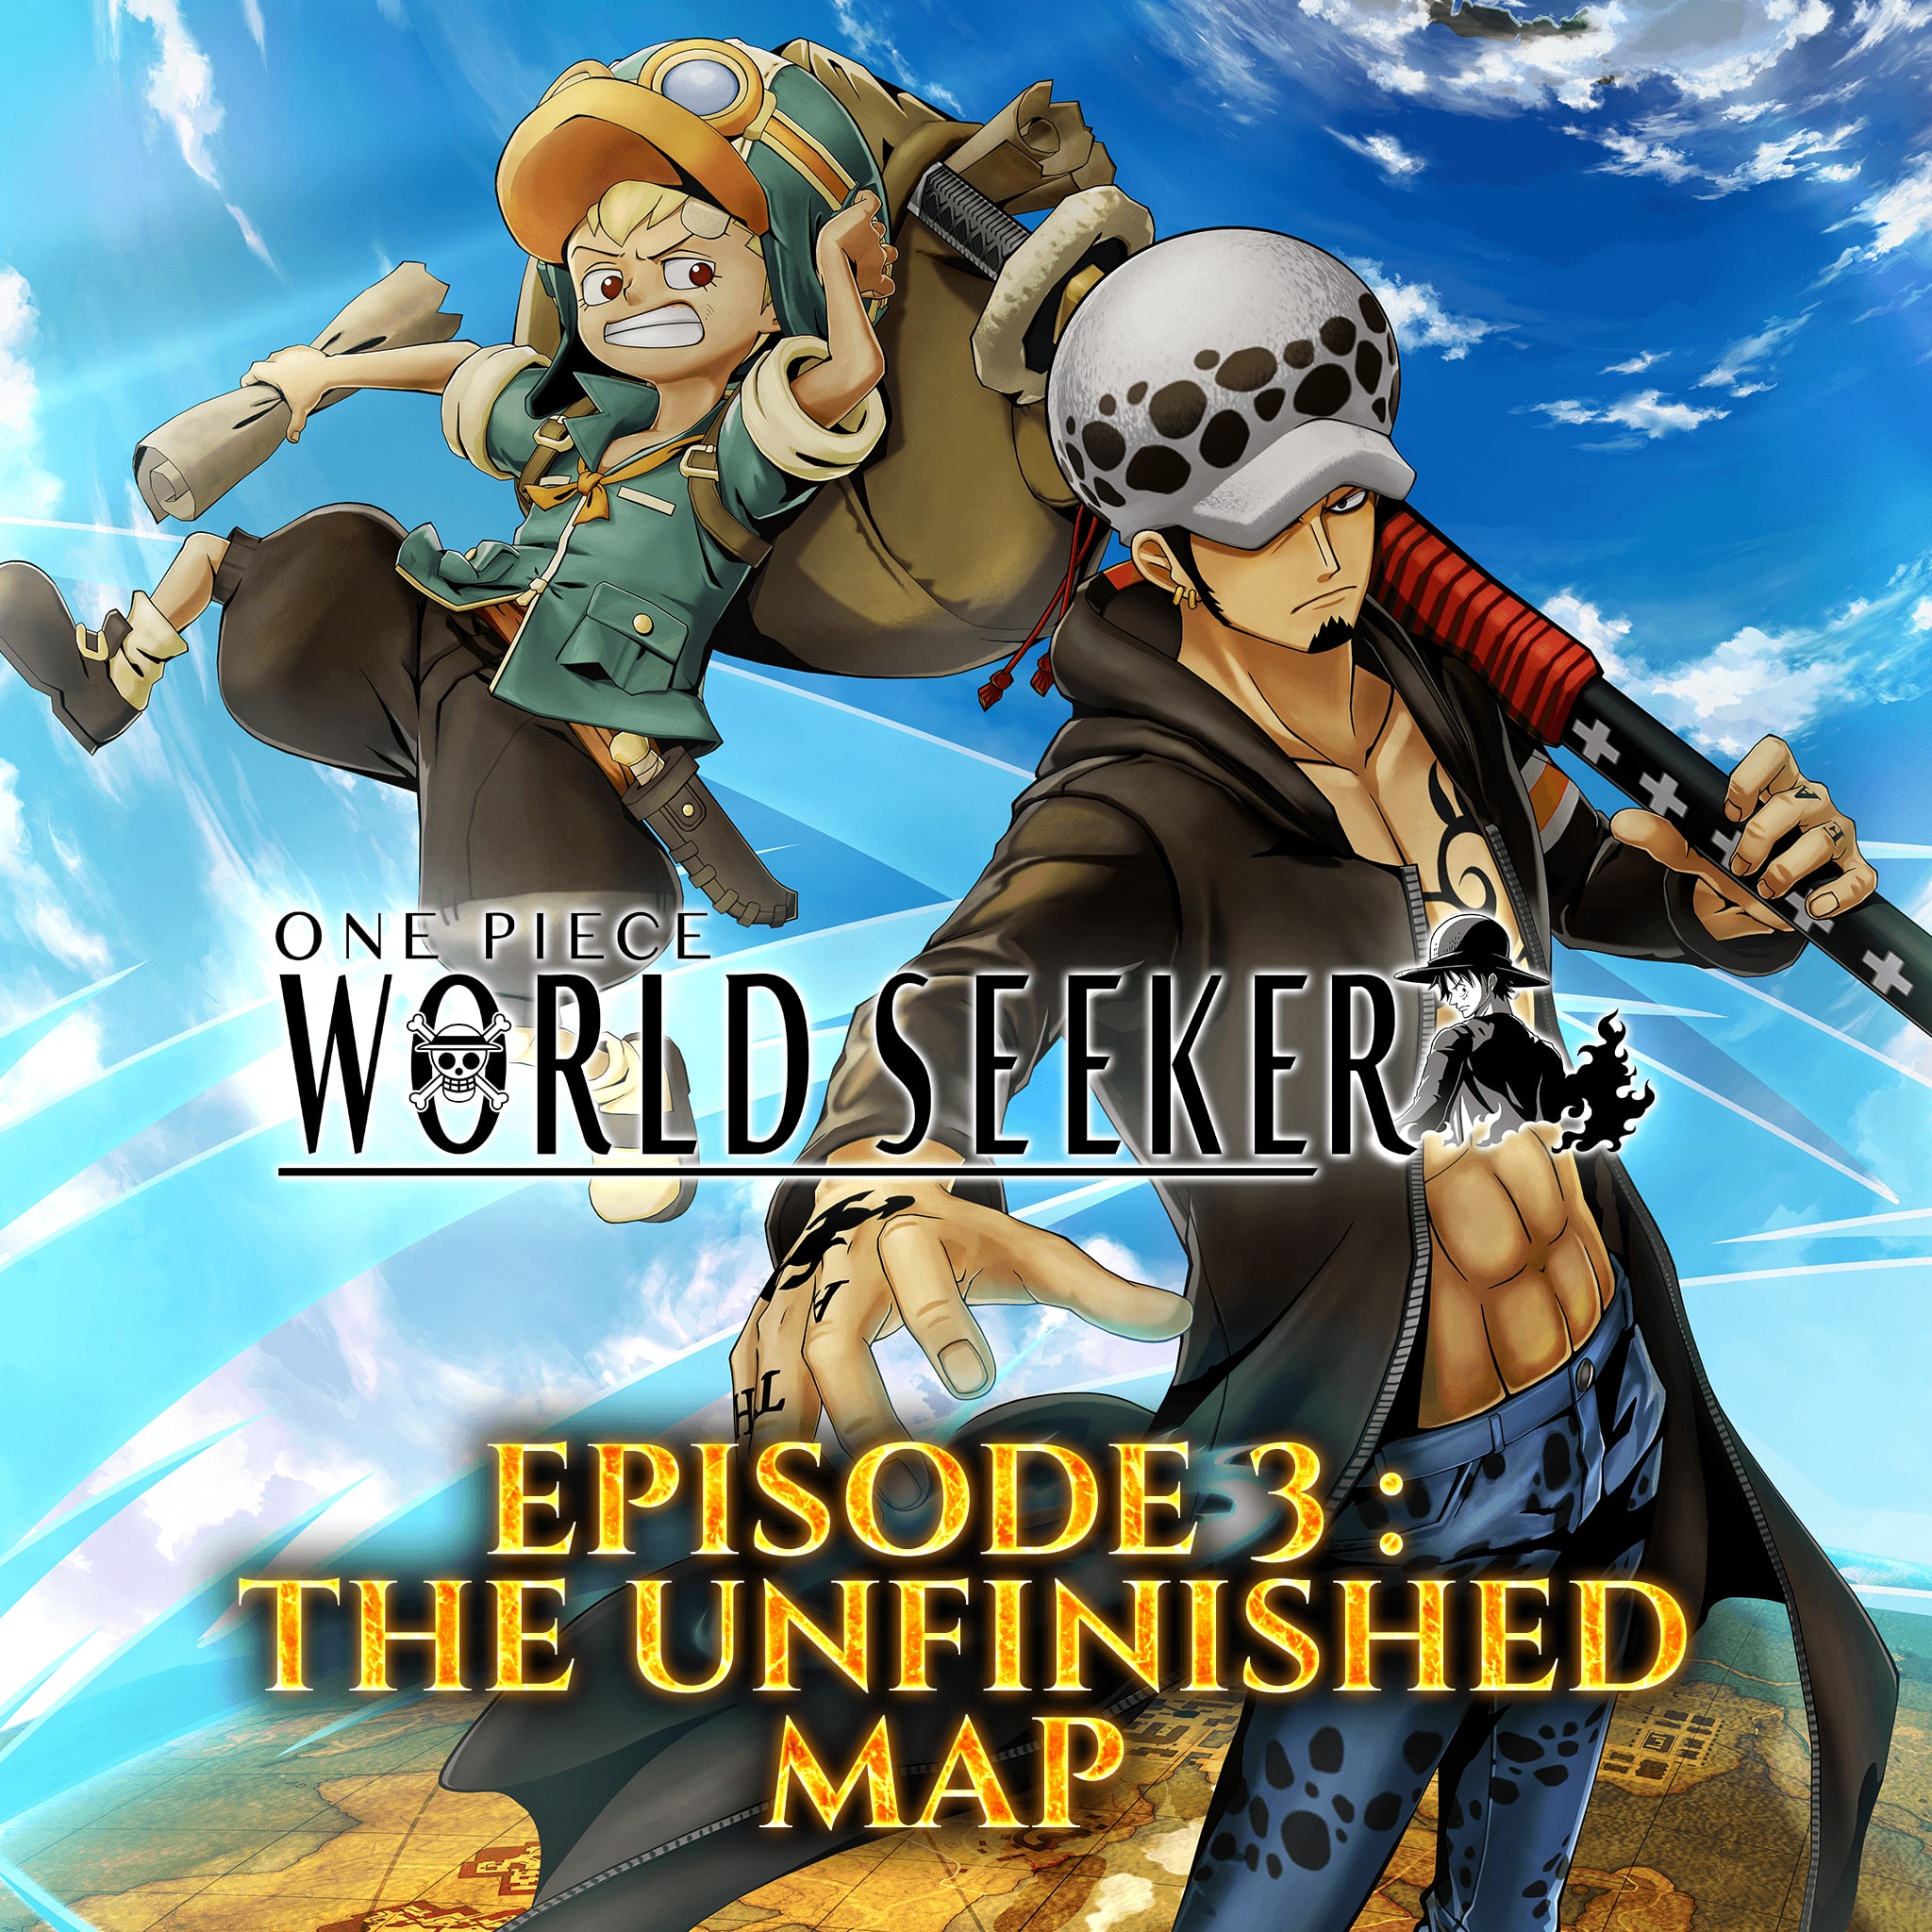 One Piece World Seeker Extra Episode 3 The Unfinished Map